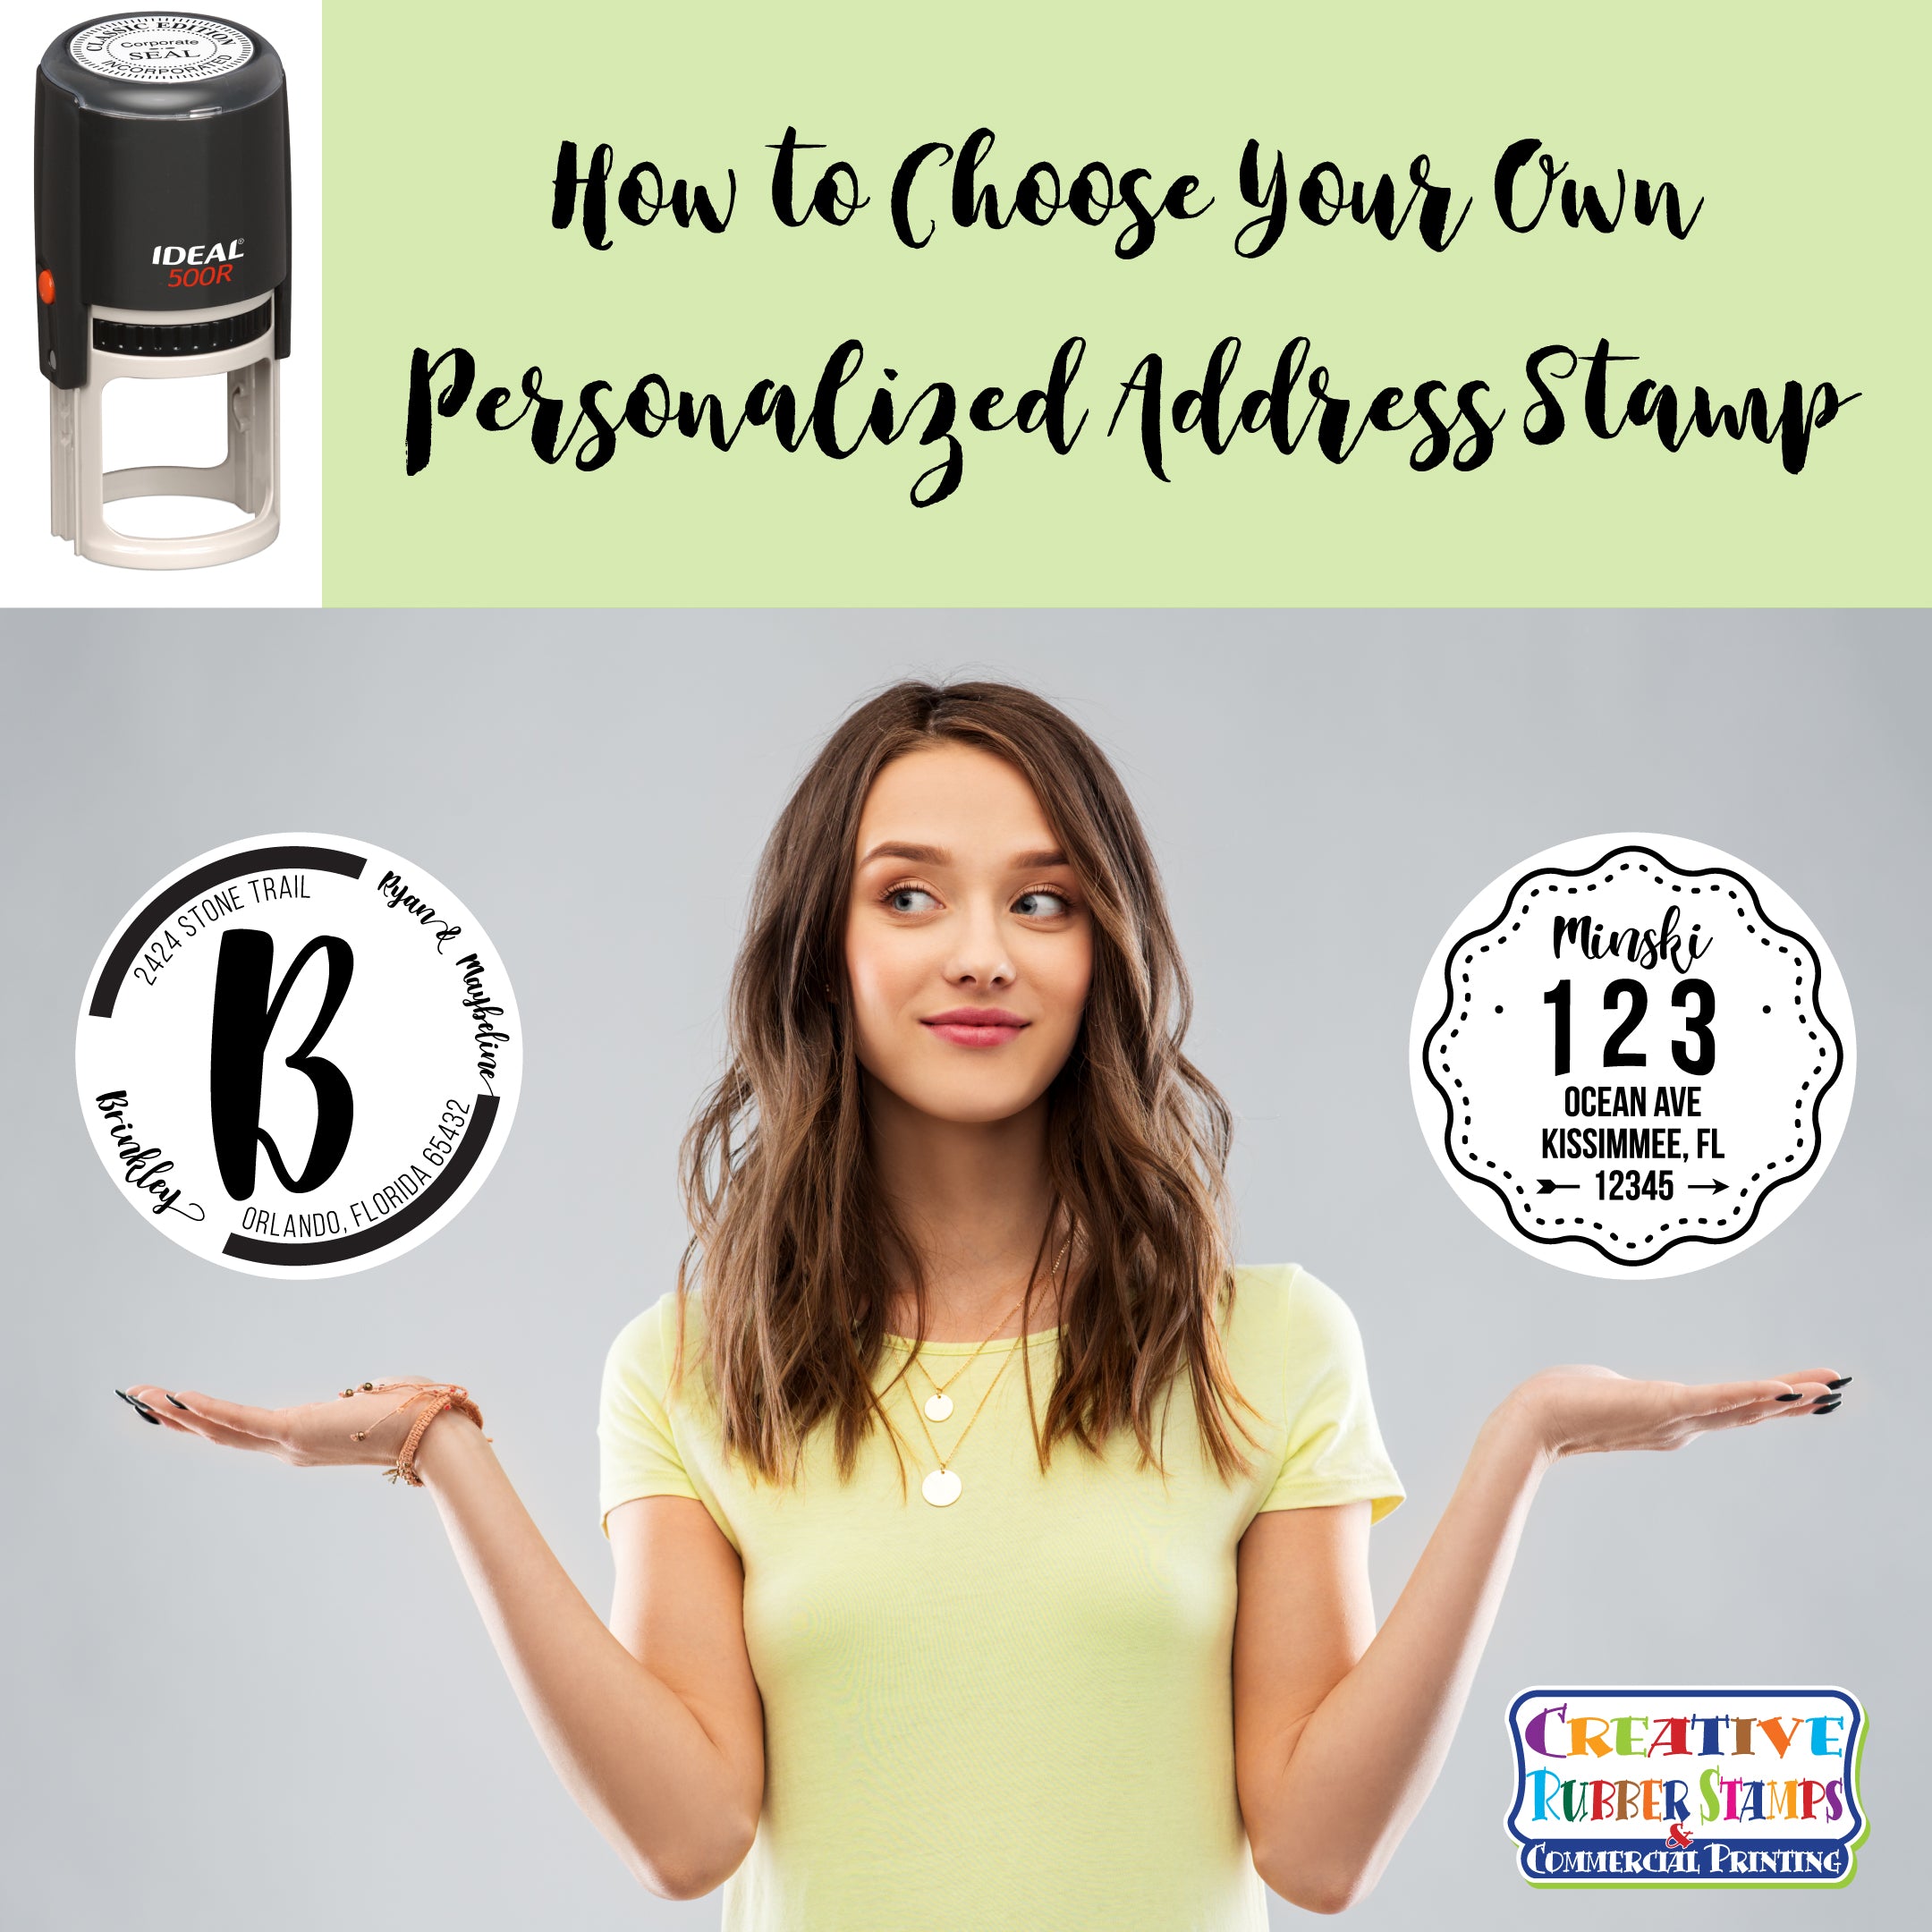 Why Do You Need Your Own Customized Rubber Stamp?